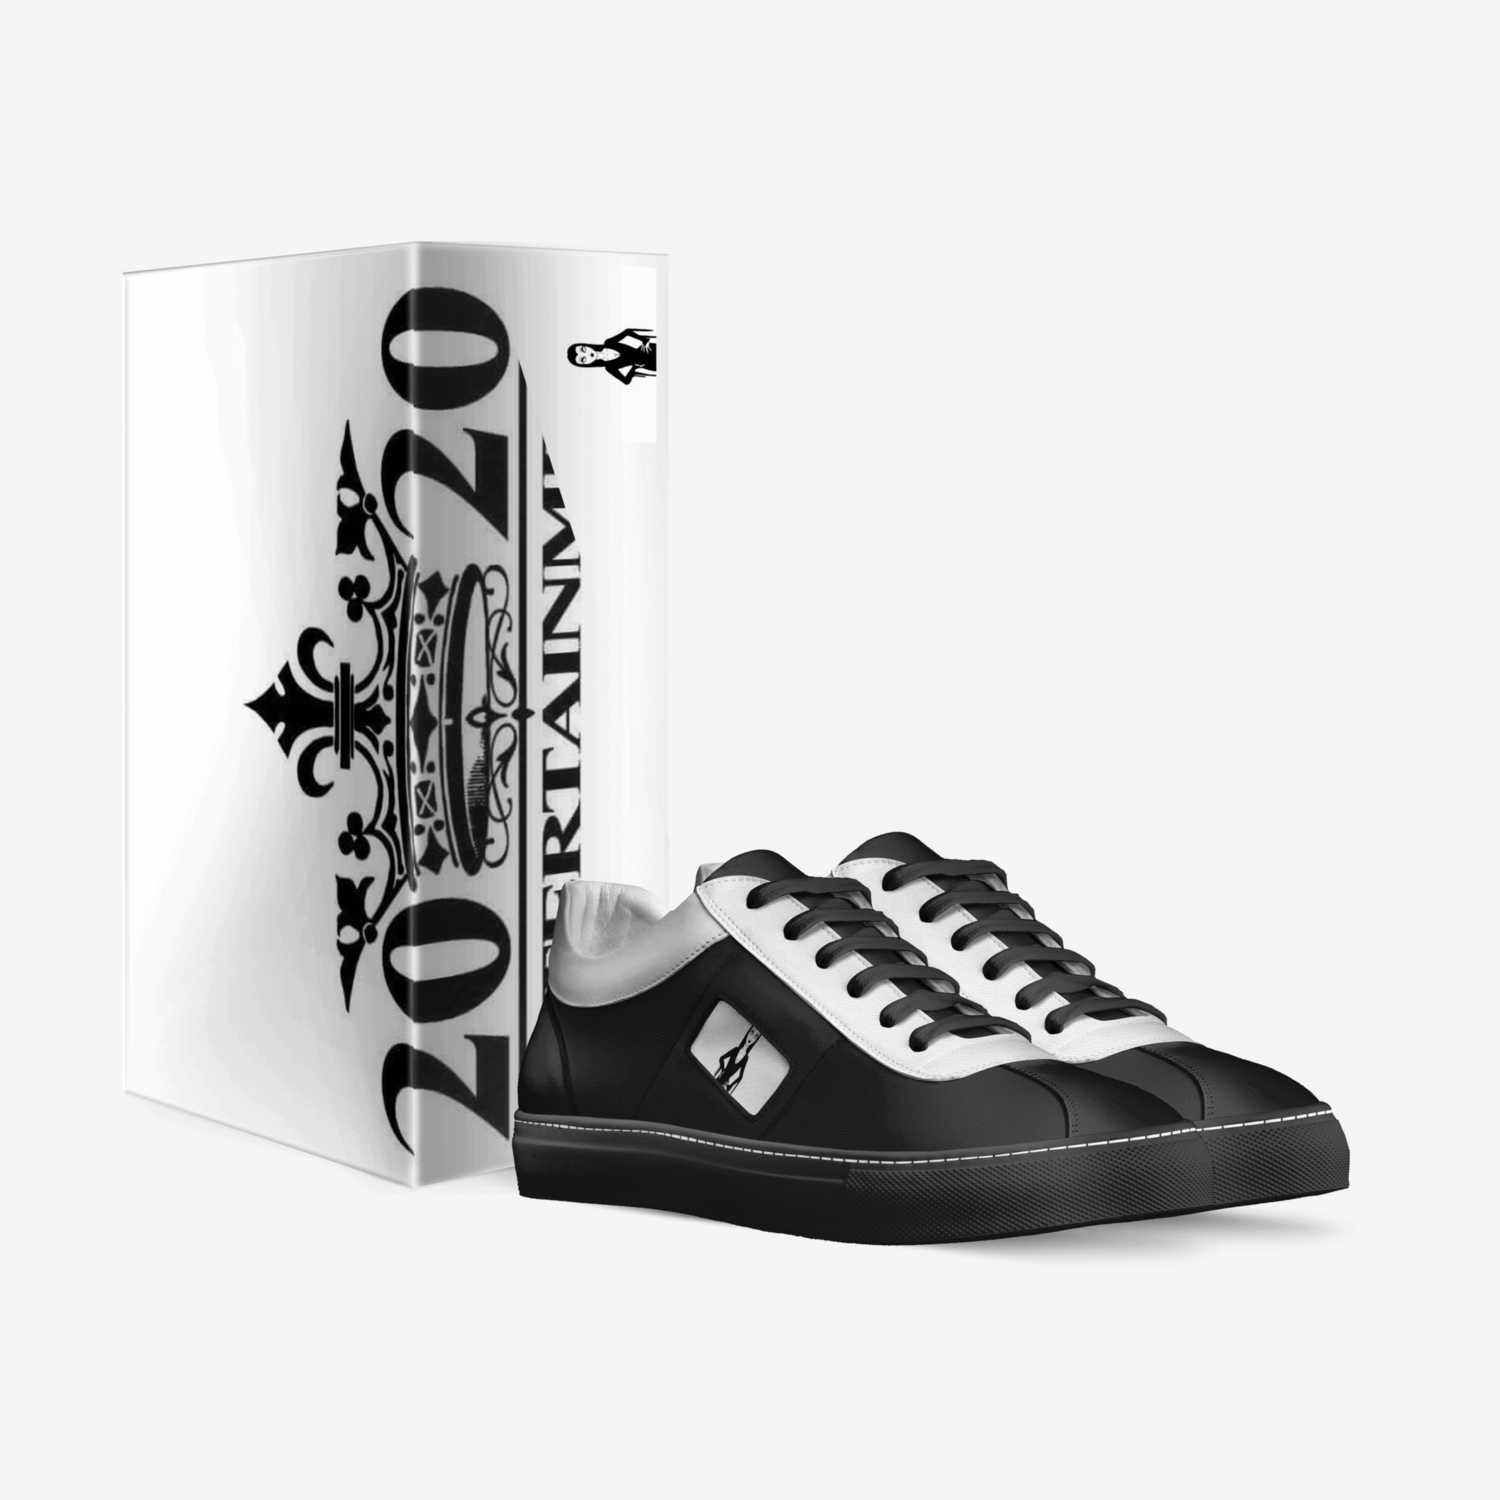 2020 Morticia's custom made in Italy shoes by Tamesubliminal Collins | Box view